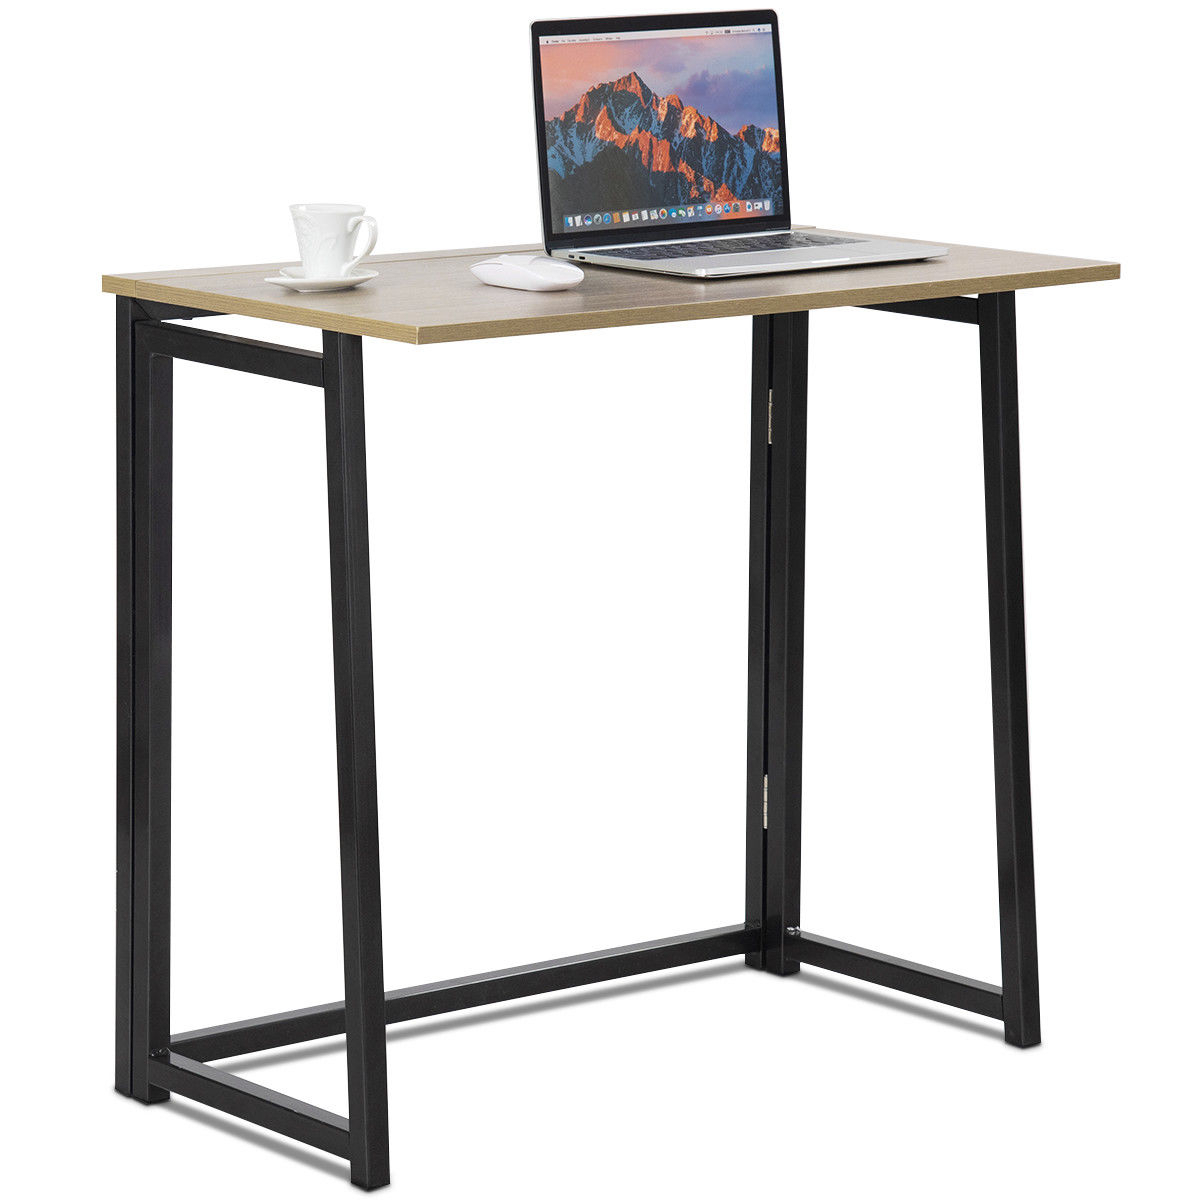 Foldable Computer Desk Home Office Laptop Table Writing Desk Study Table - Natural + Black